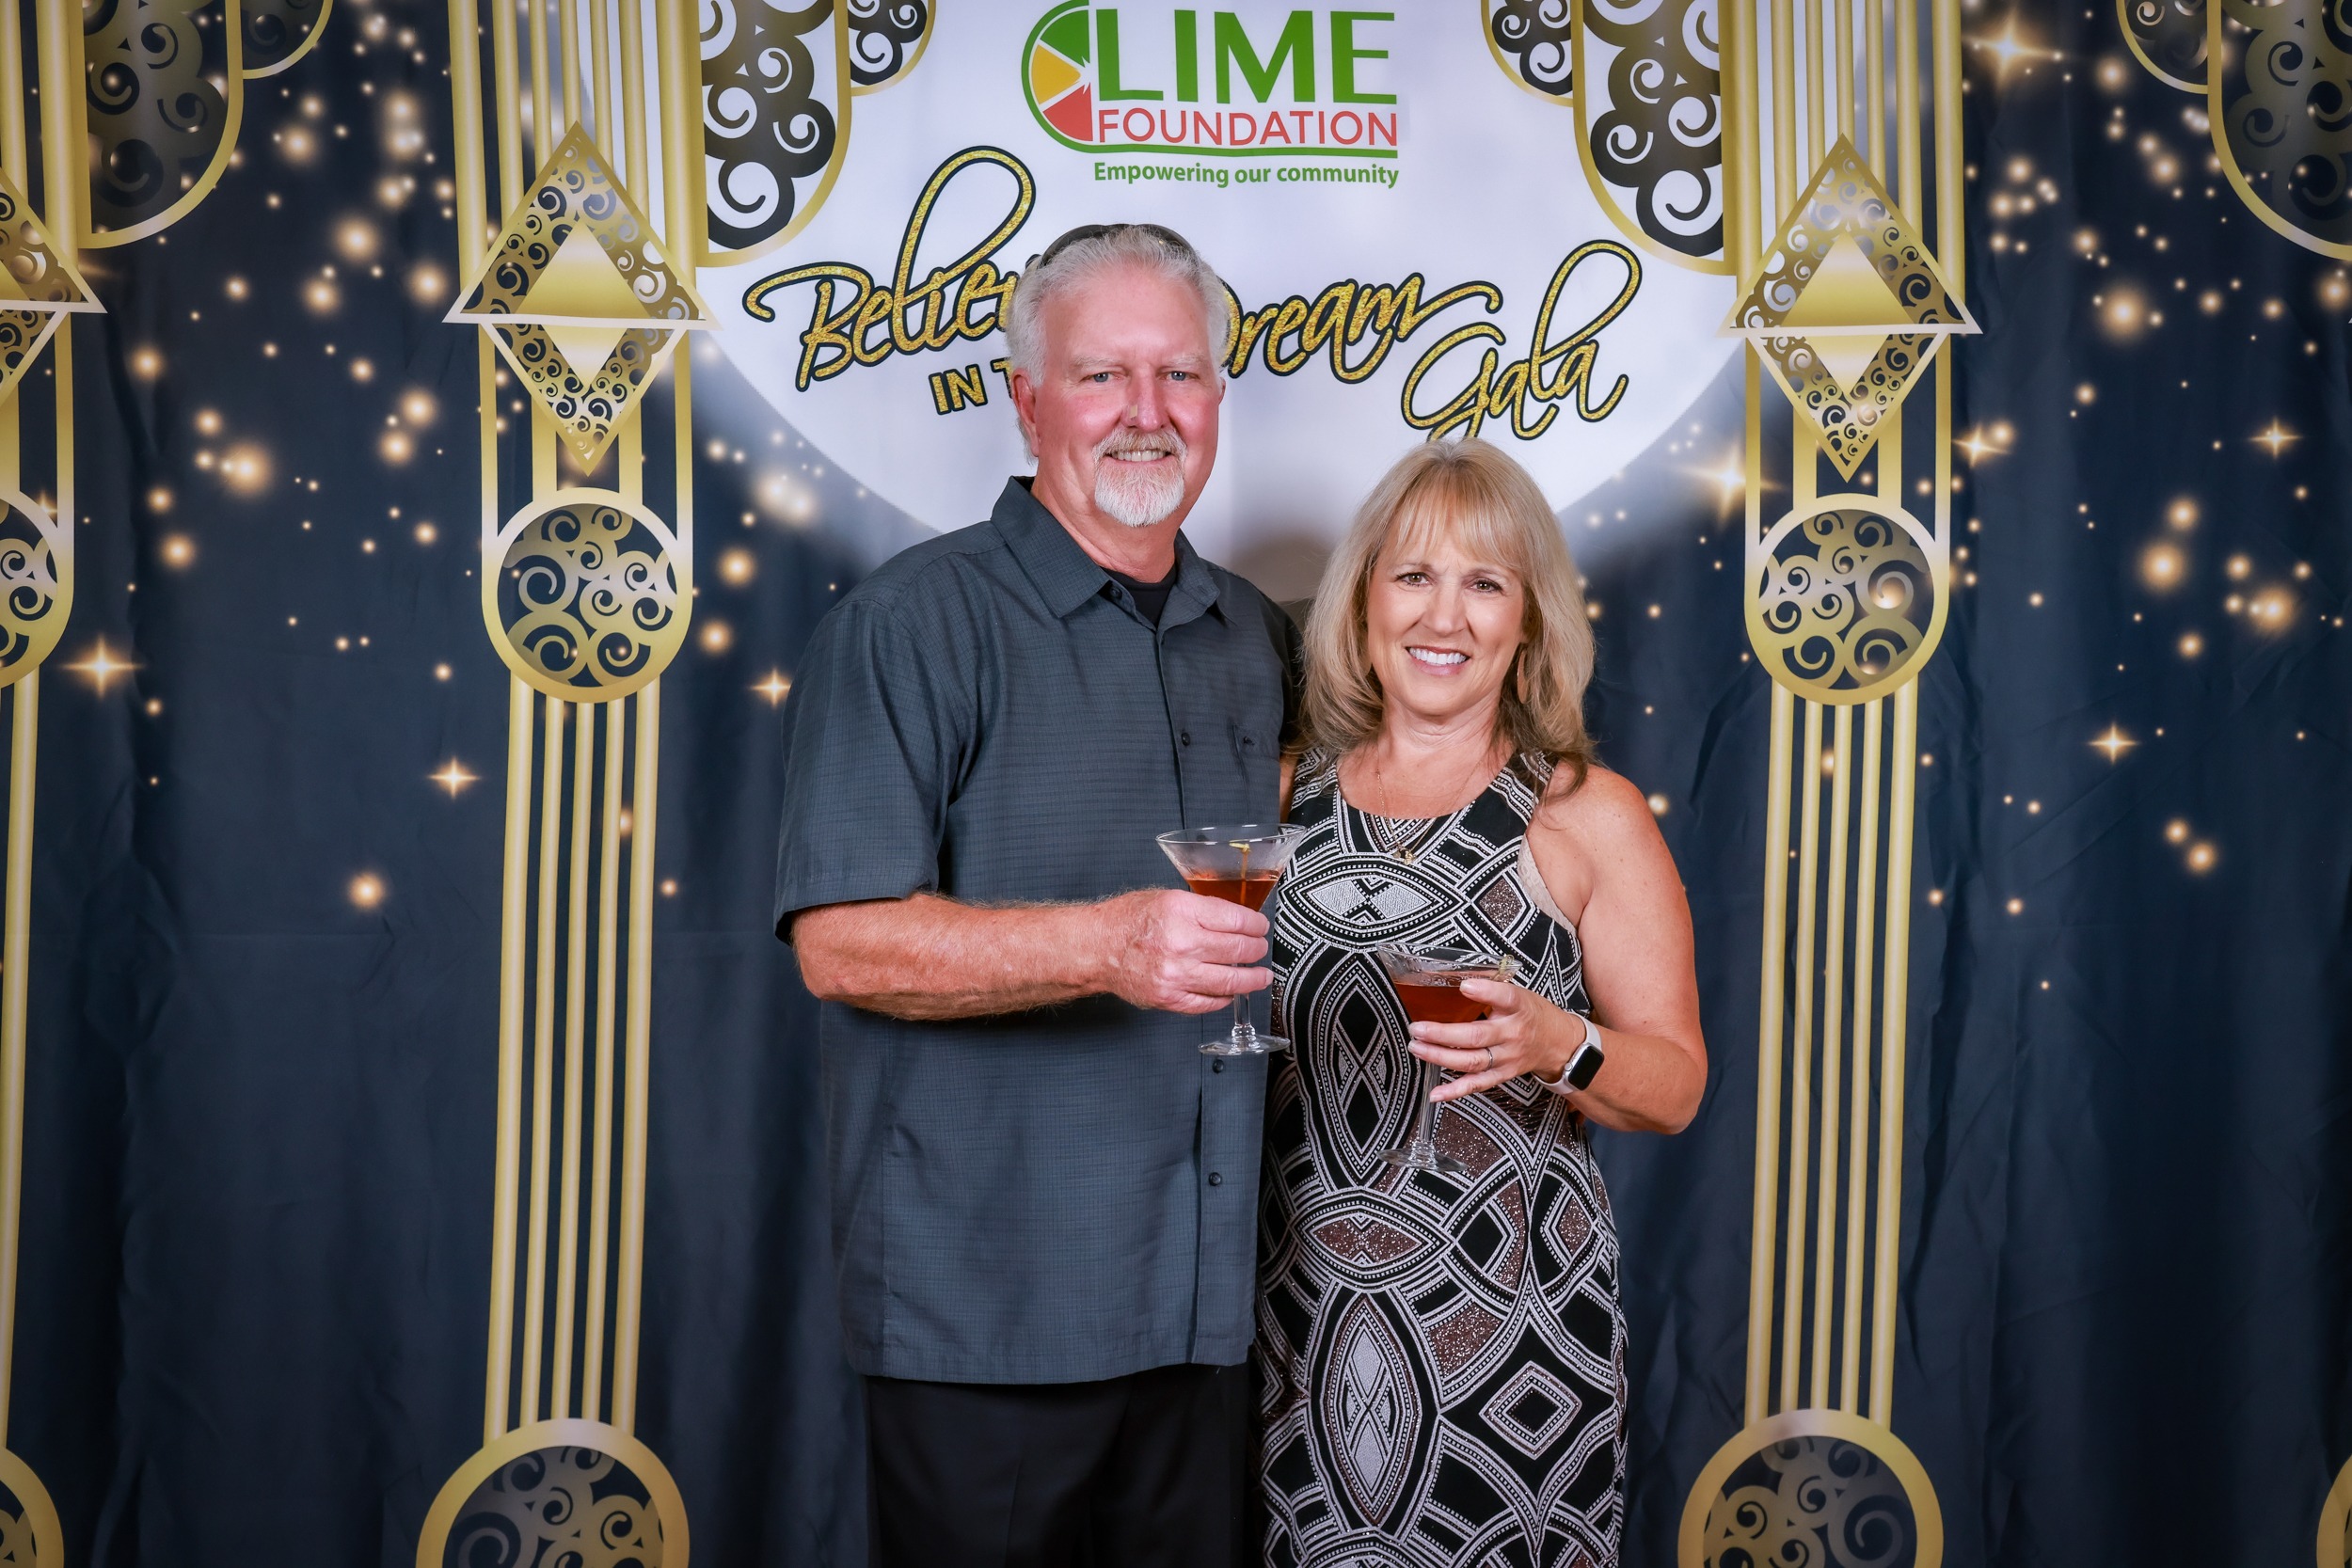 A man and woman posing for a photo in front of a backdrop at the LIME Foundation event.